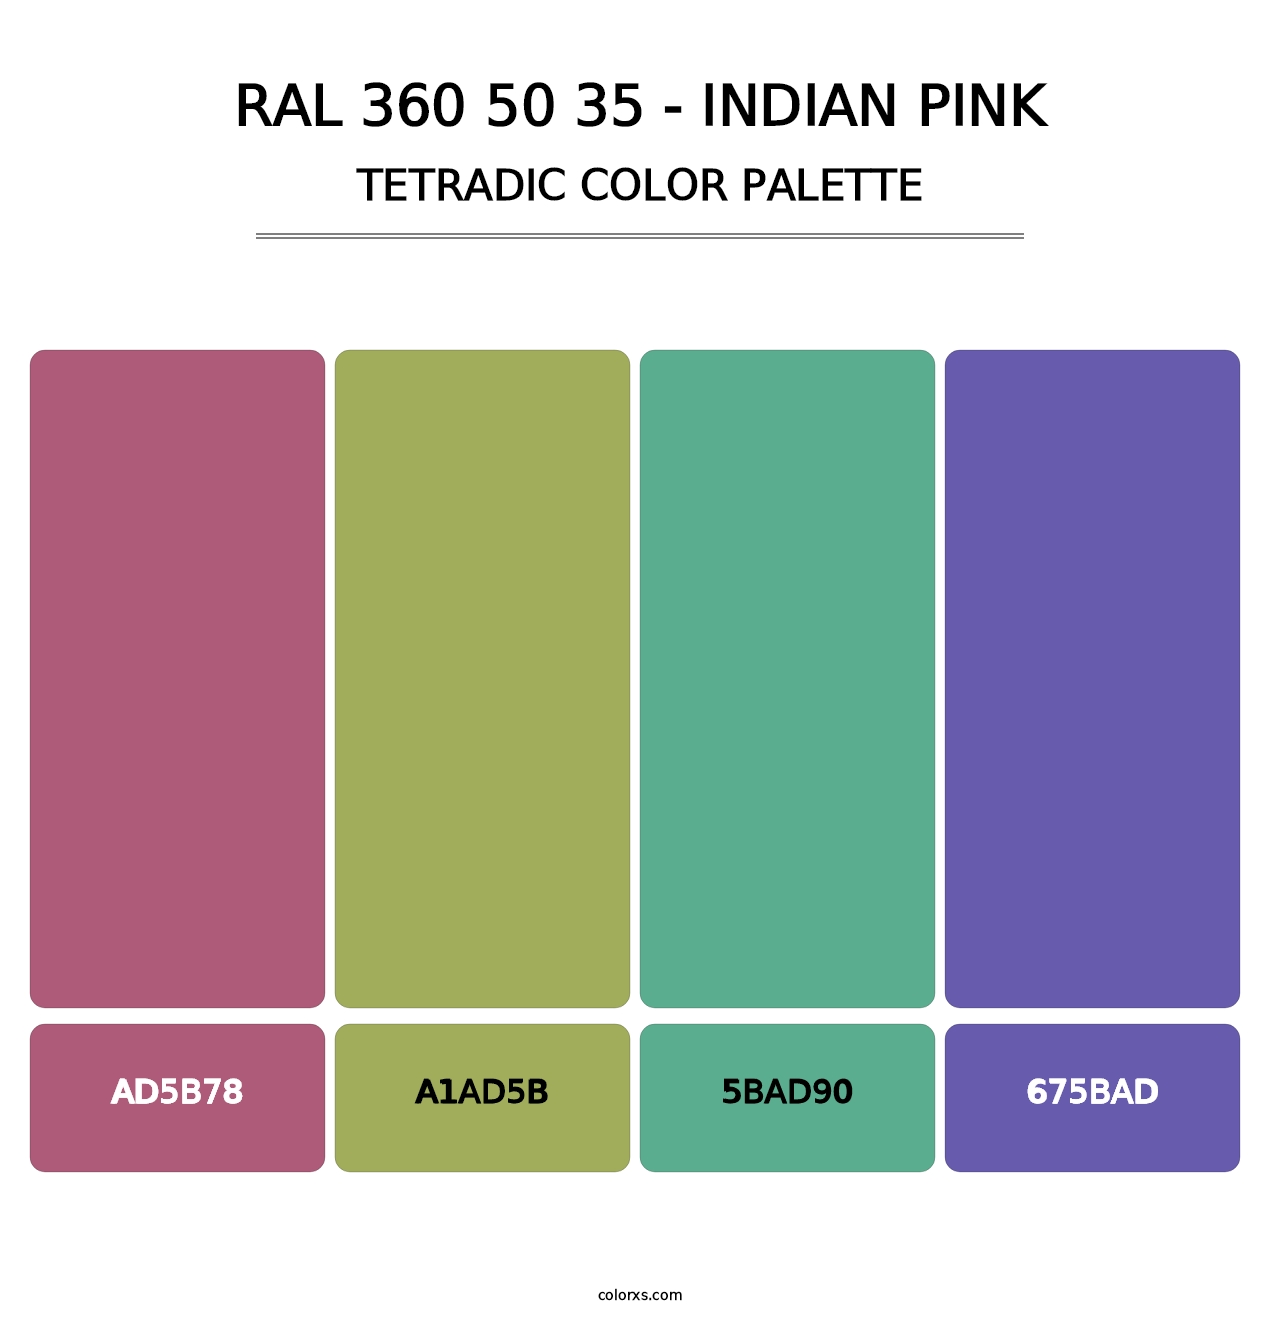 RAL 360 50 35 - Indian Pink - Tetradic Color Palette